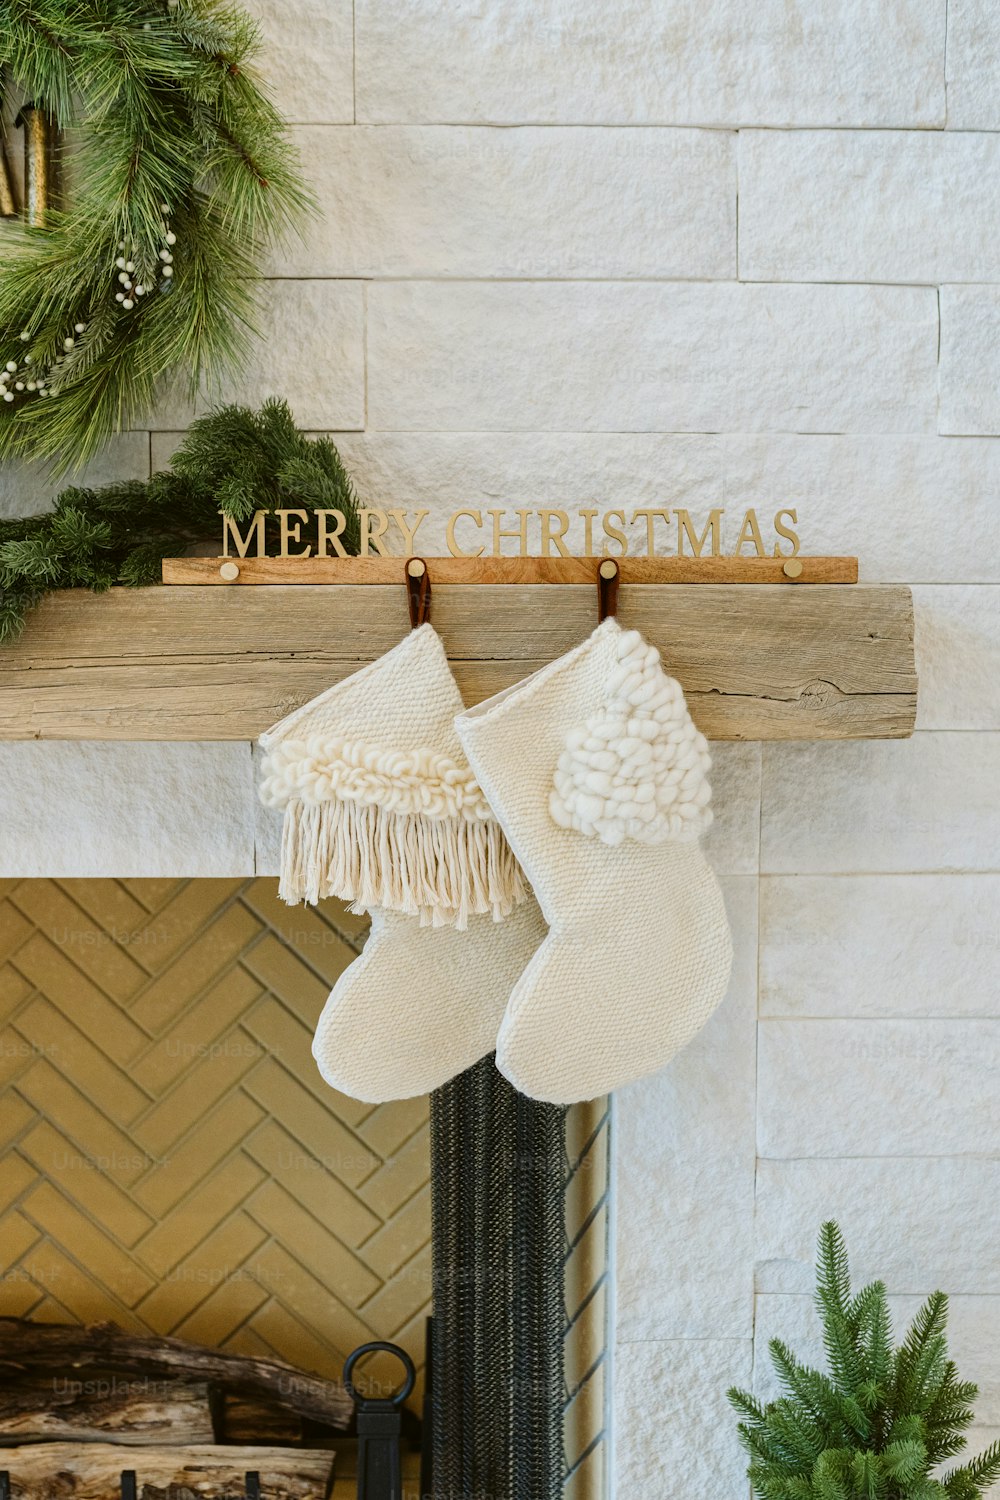 a fireplace with stockings and a merry christmas sign